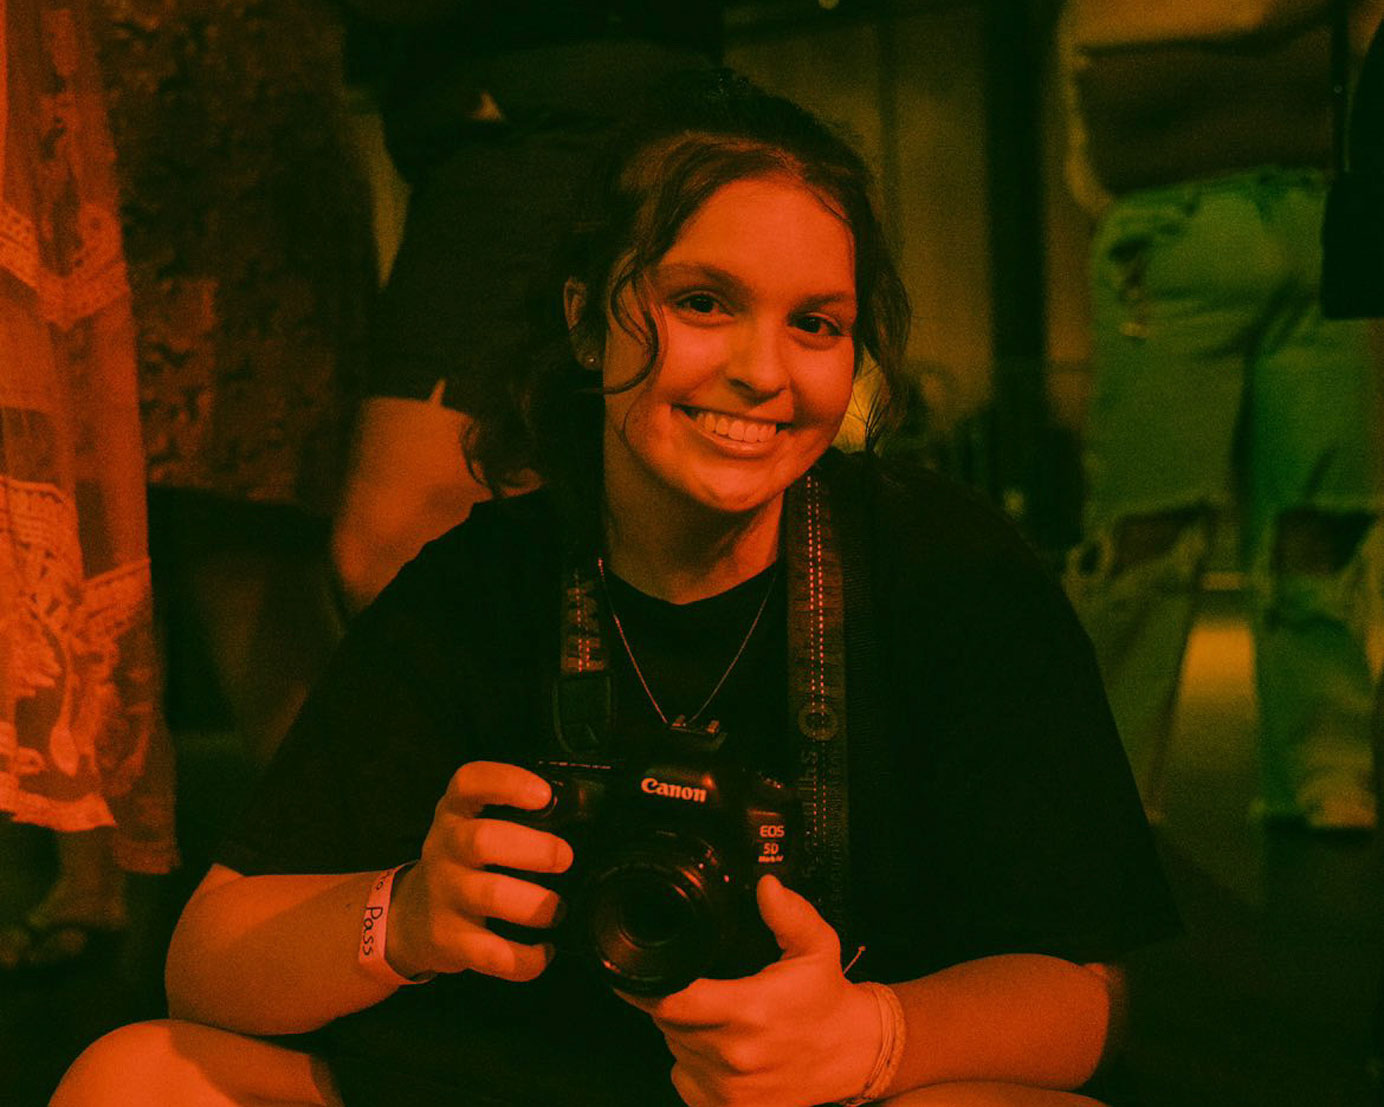 The photojournalist, Kennedy Kish, holds a camera before a concert.